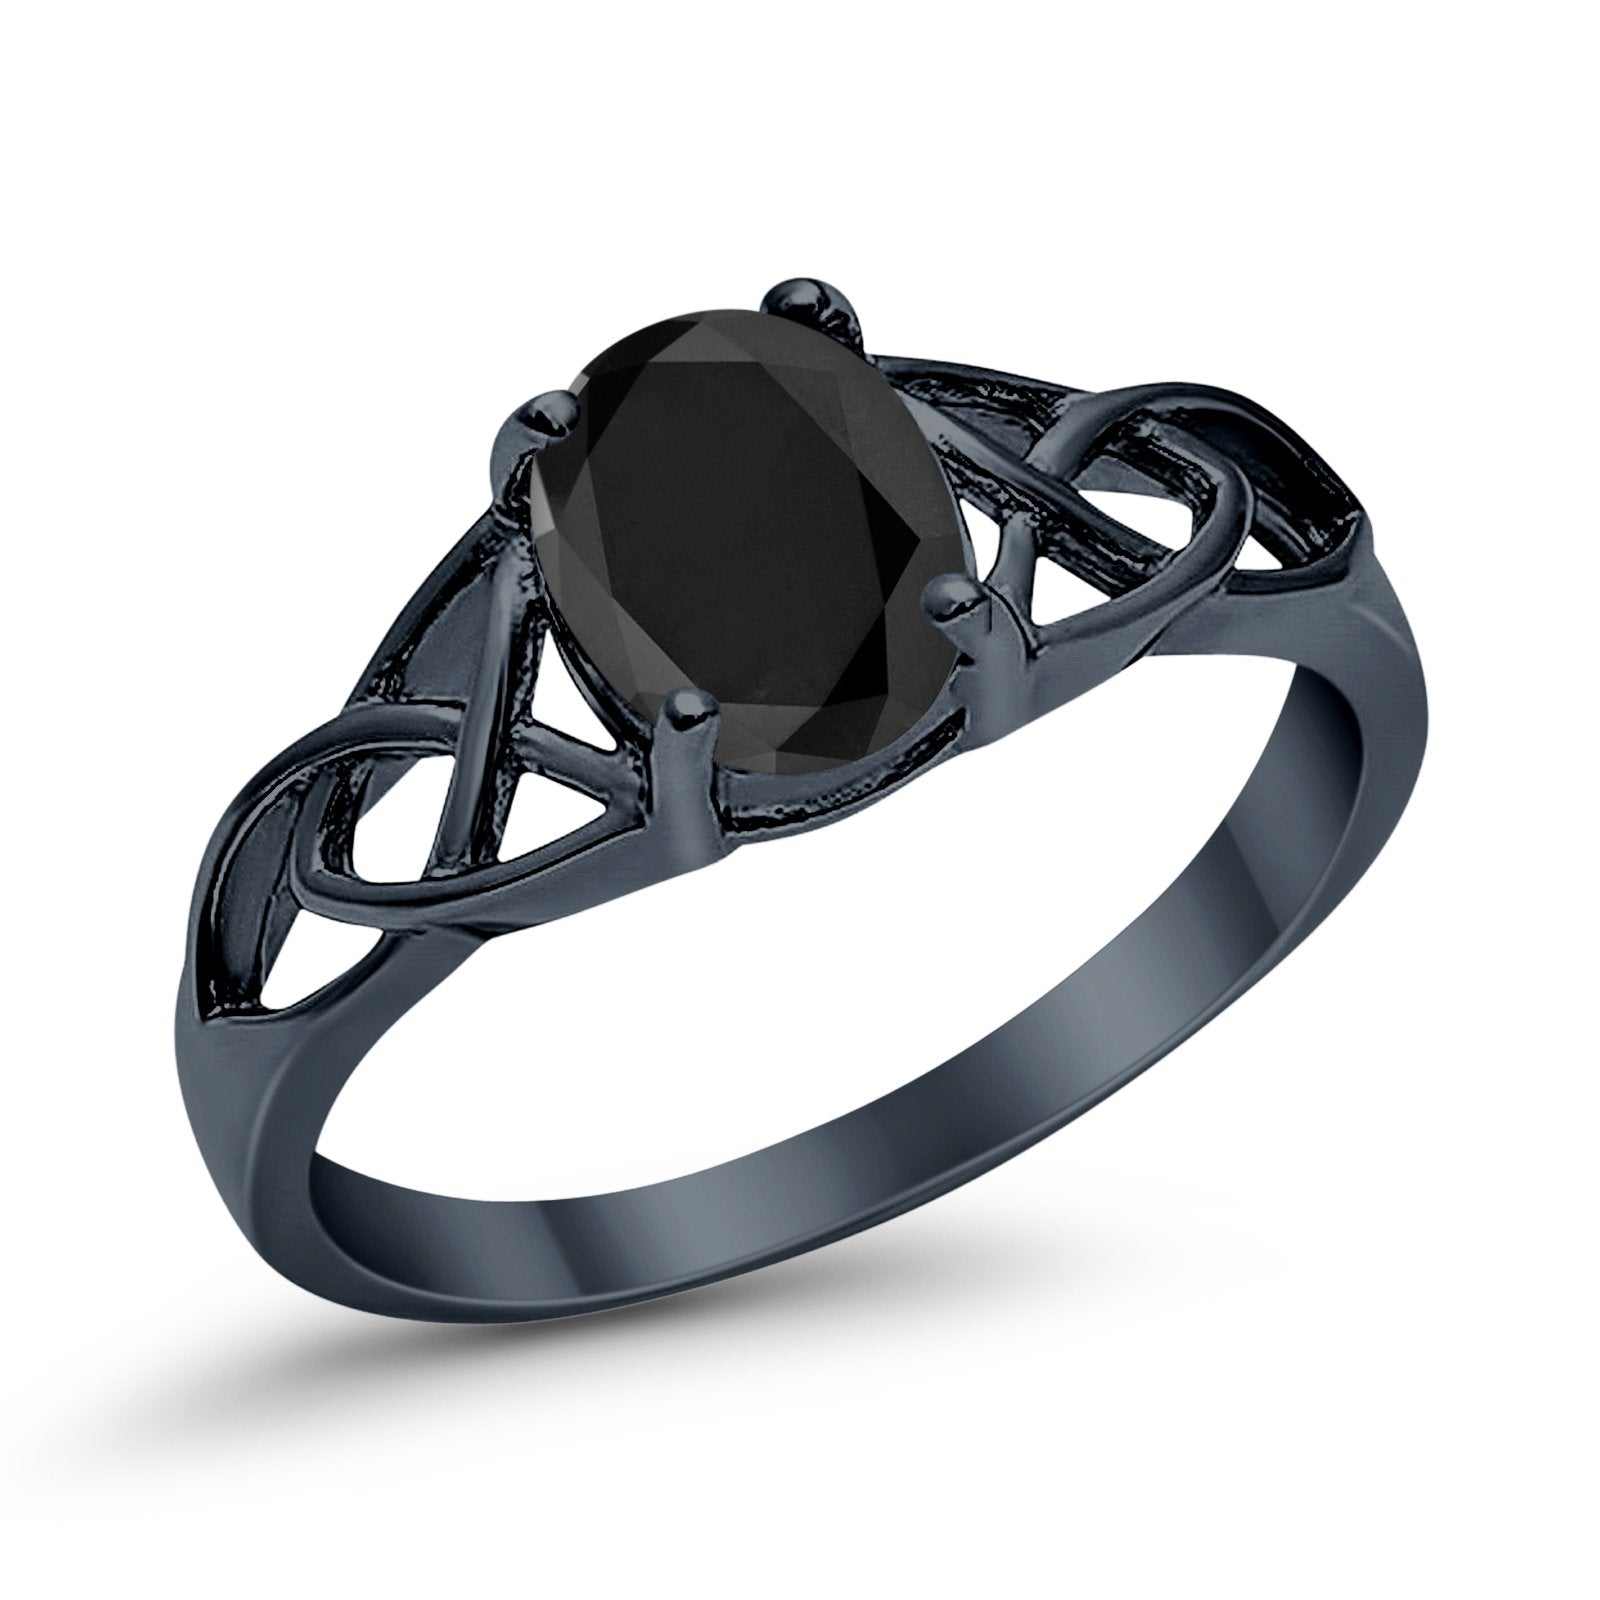 Halo Vintage Style Wedding Ring Black Tone, Simulated Black CZ 925 Sterling Silver